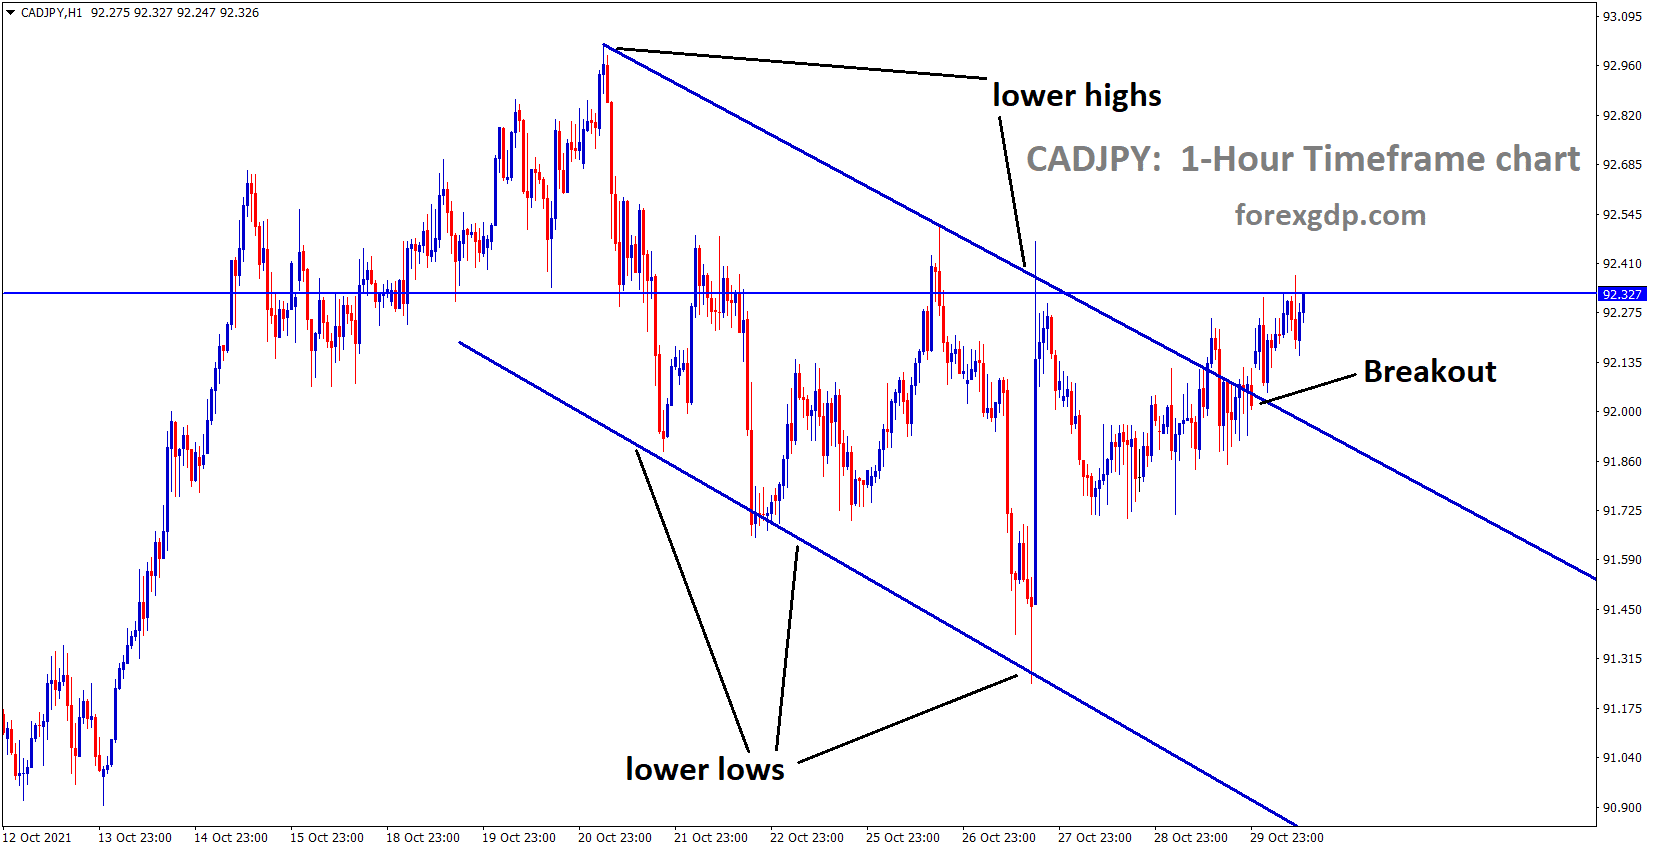 CADJPY has broken the Ascending channel and market prices are moving near to the resistance area